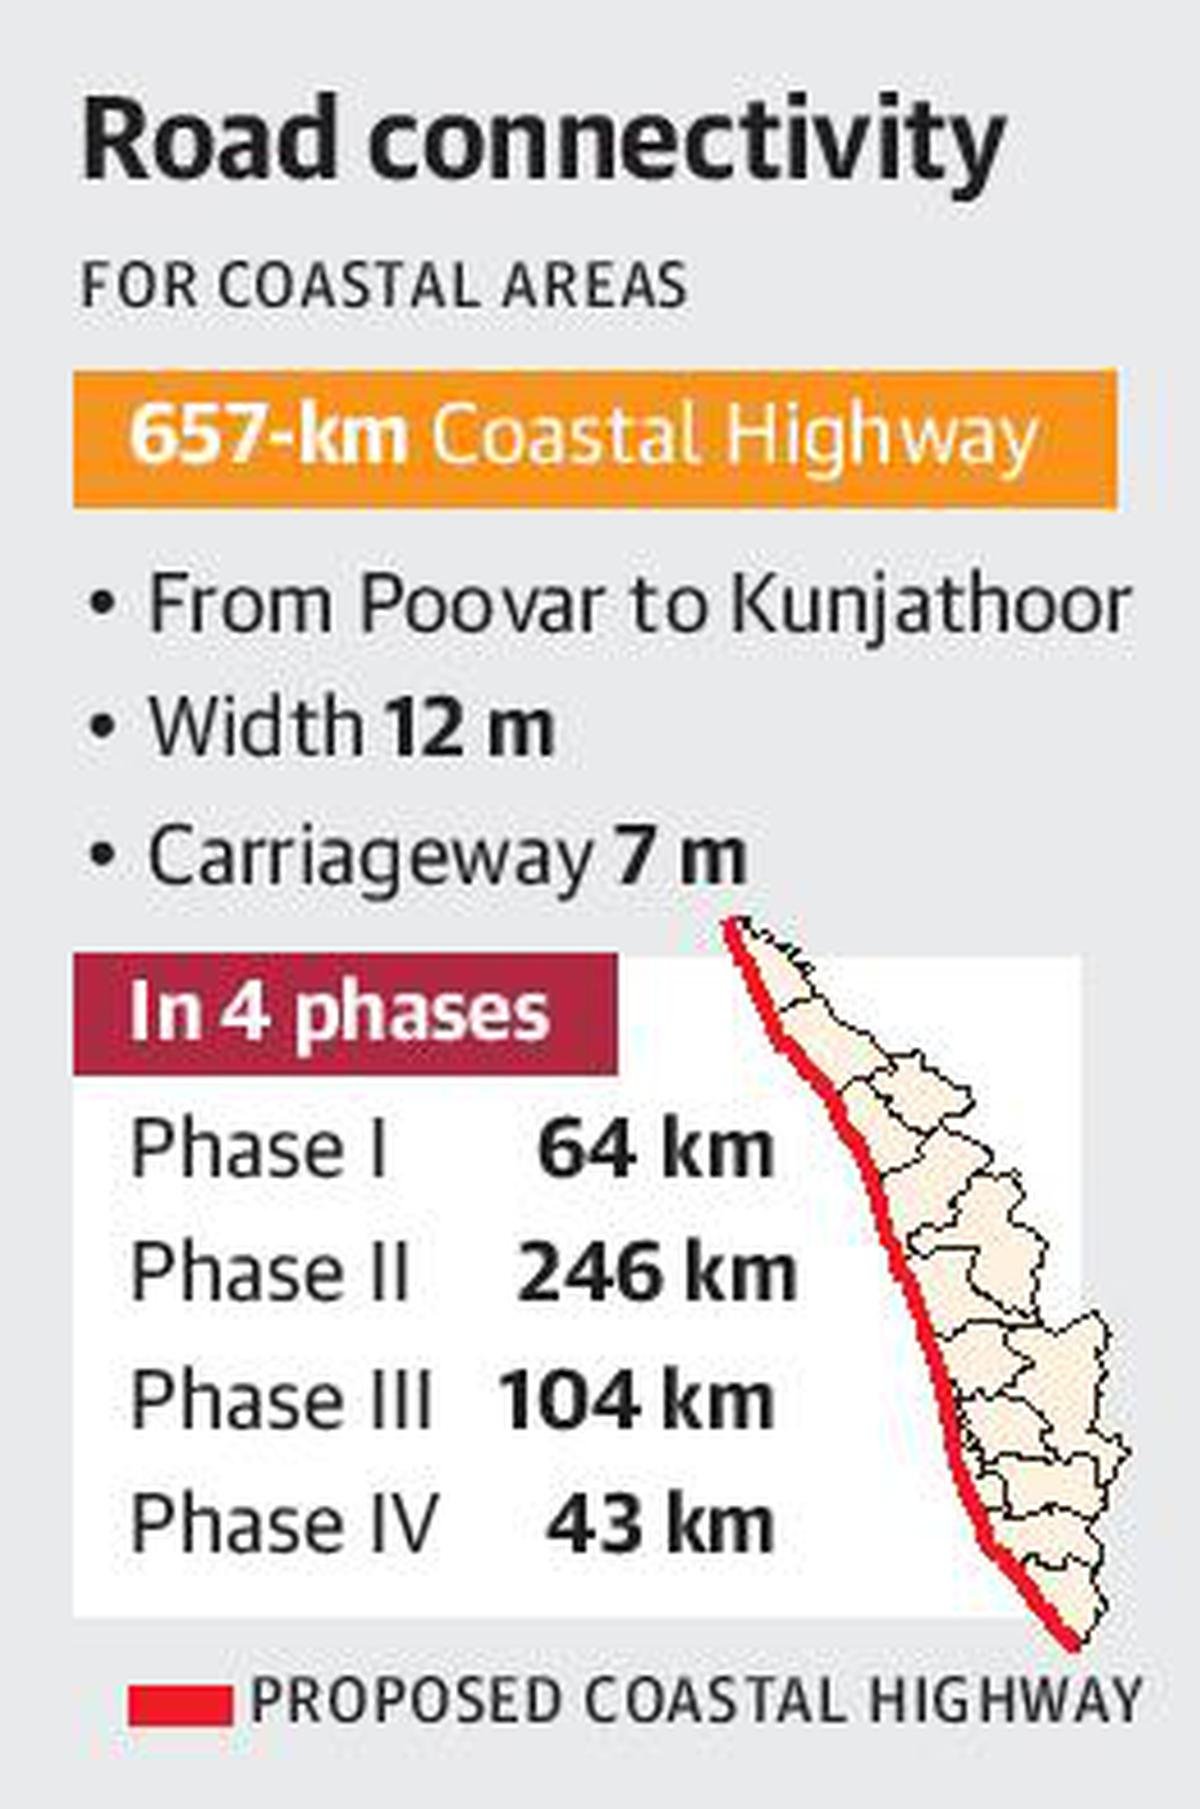 Final alignment ready for Coastal Highway - The Hindu